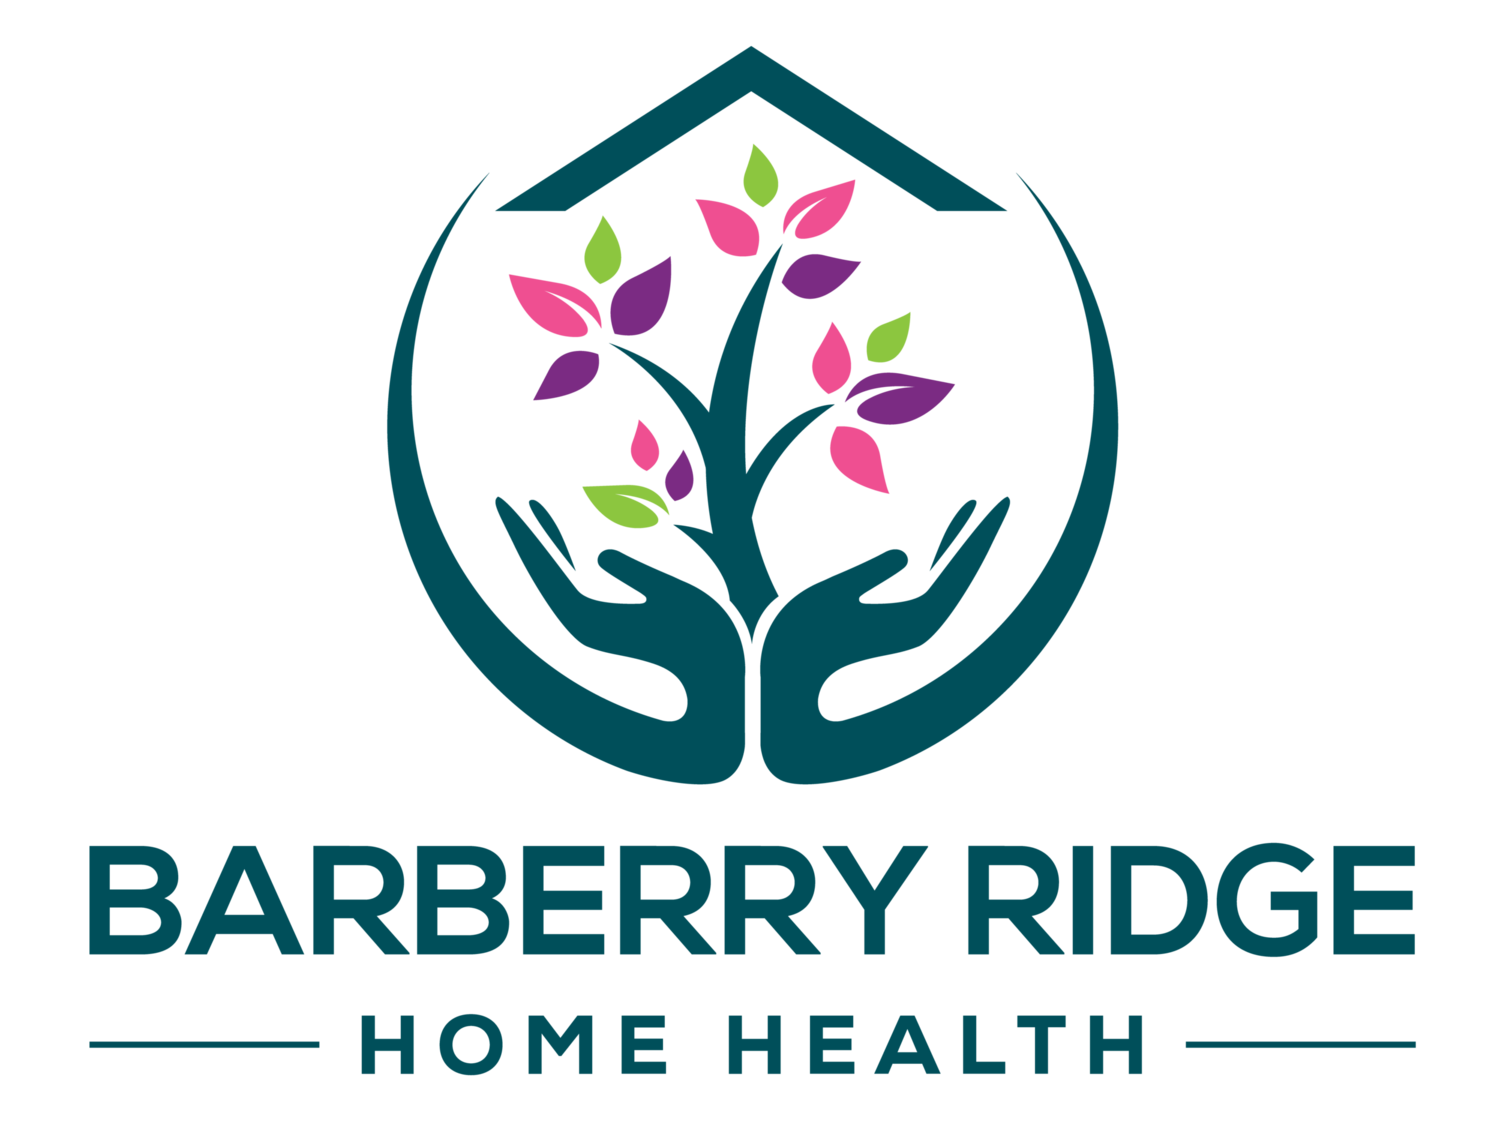 Barberry Ridge Home Health: Pittsburgh In-Home Care